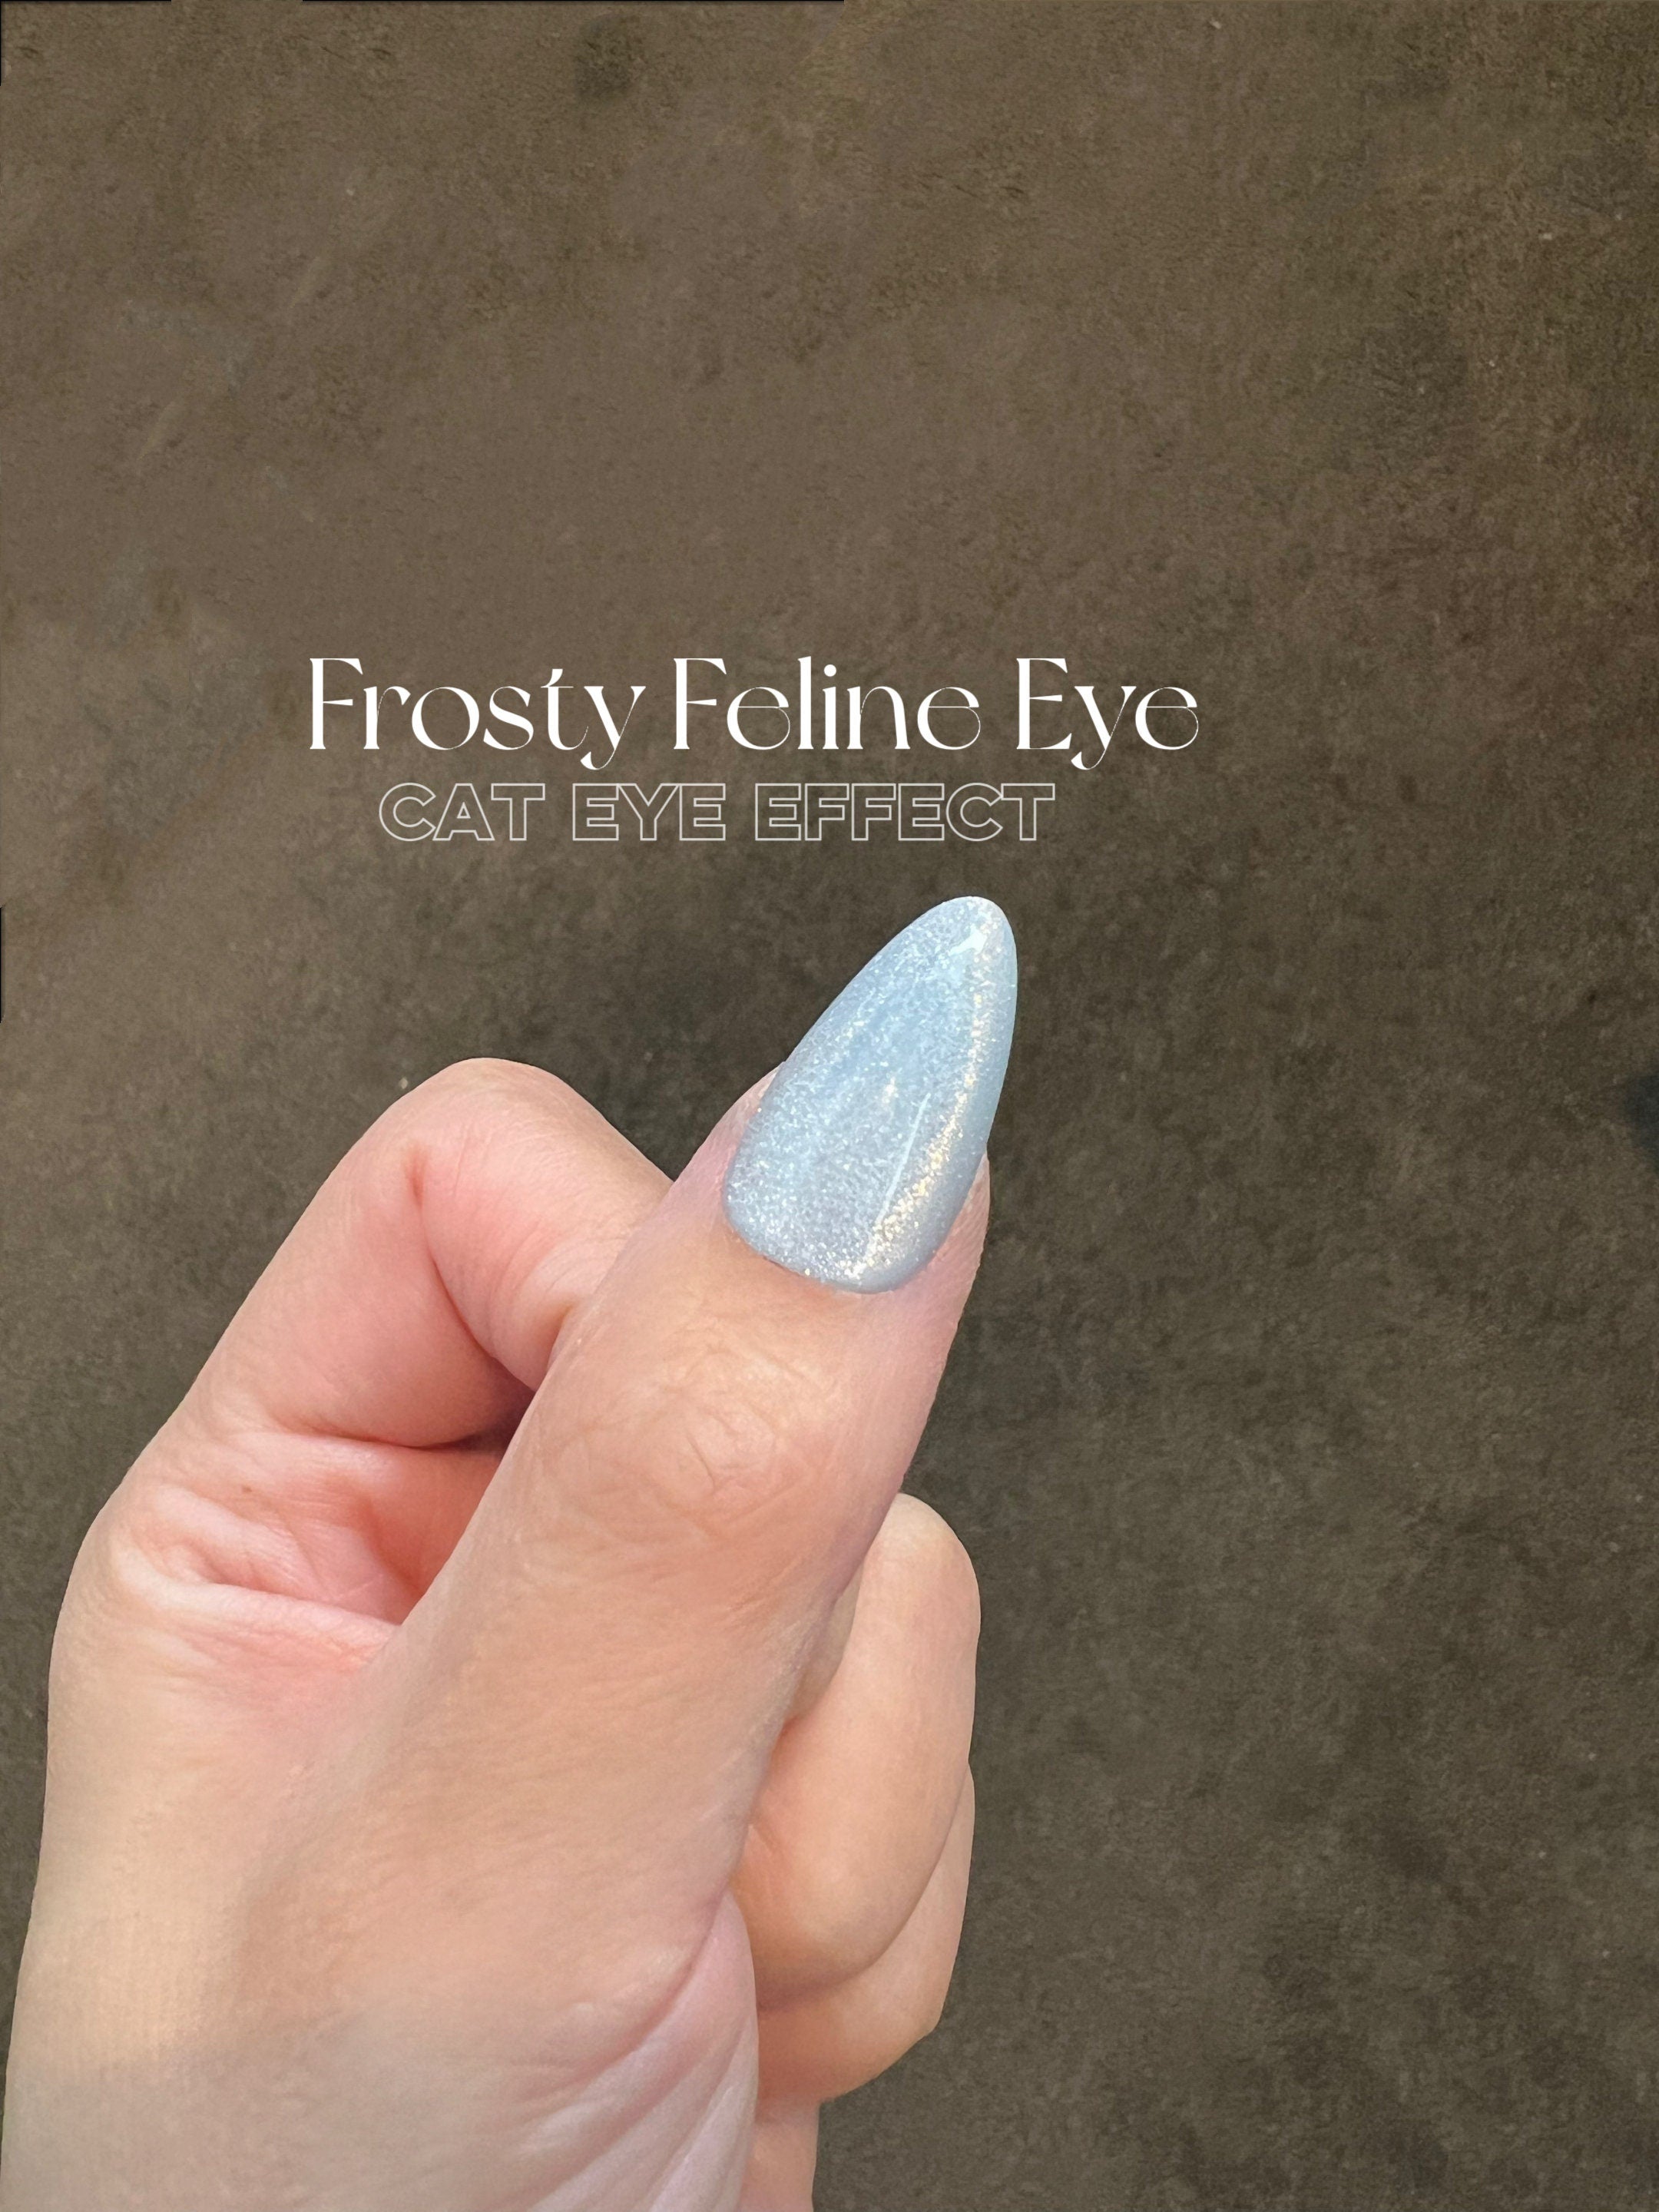 43 Stunning Ways to Wear Baby Blue Nails - StayGlam | Coffin shape nails, Blue  nail art designs, Pastel nails designs